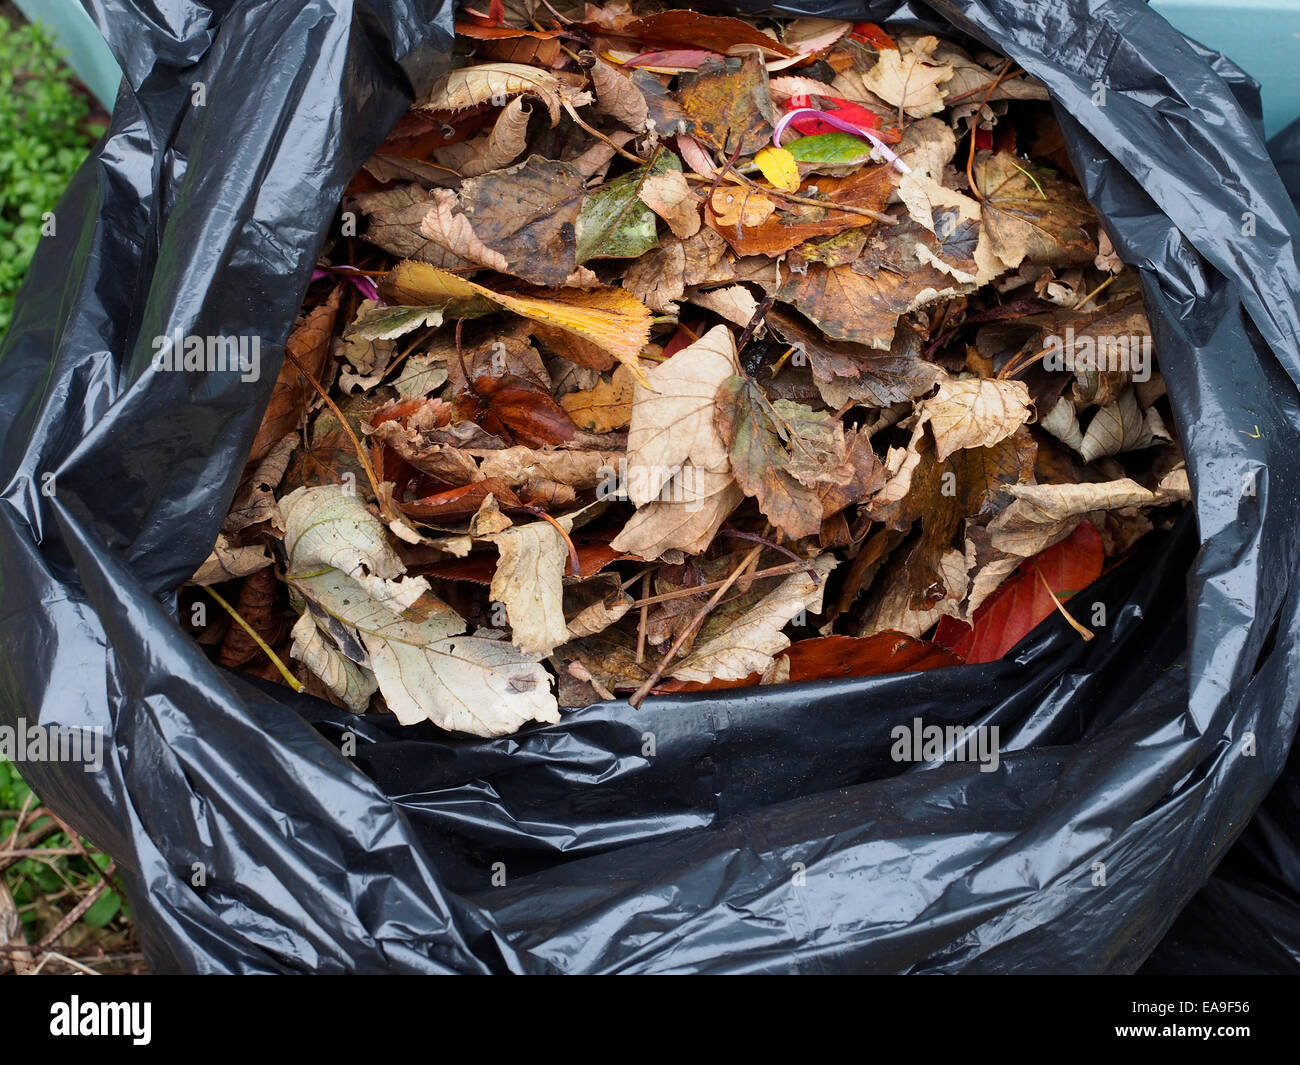 Black plastic bag filled with dead autumn leaves, which will decompose in the bag forming leaf mould a useful garden fertiliser Stock Photo